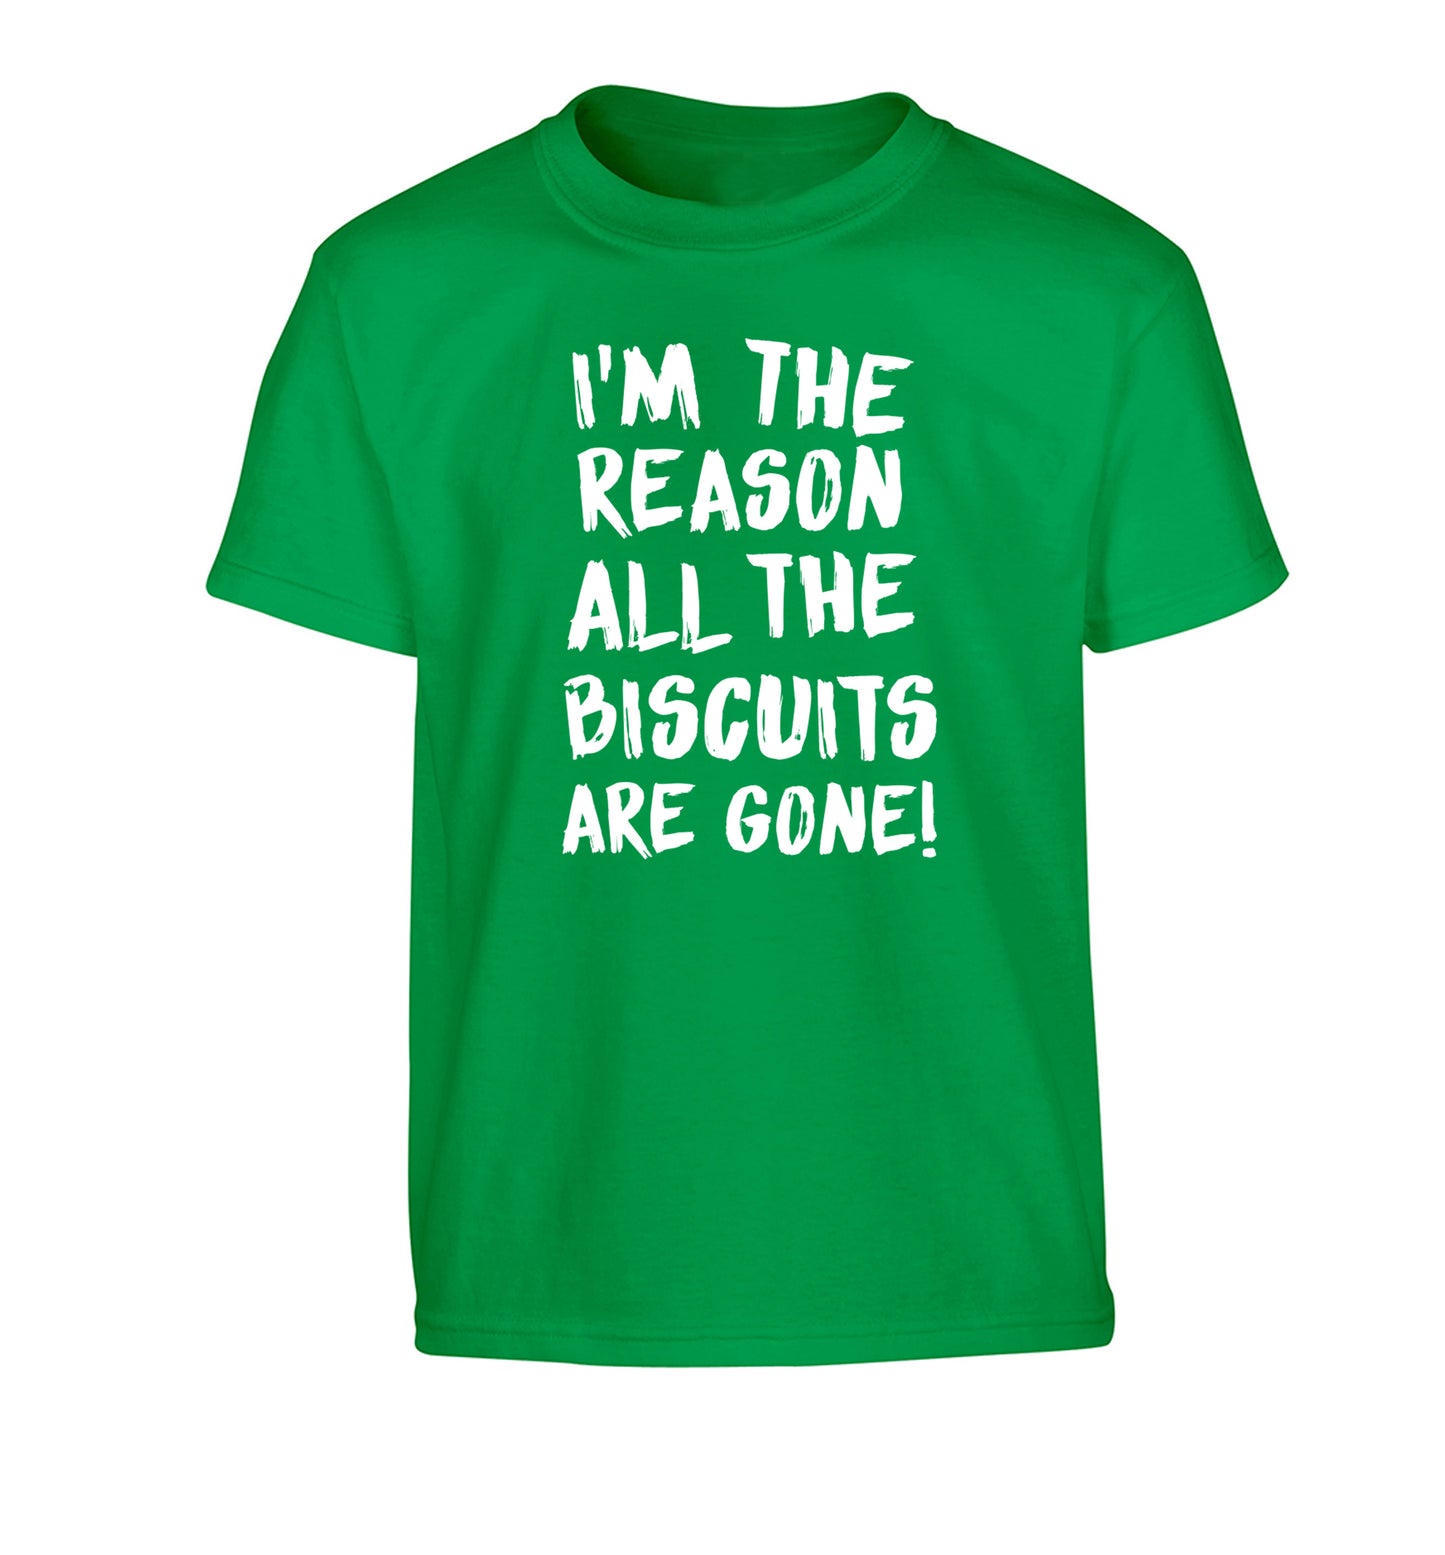 I'm the reason why all the biscuits are gone Children's green Tshirt 12-13 Years